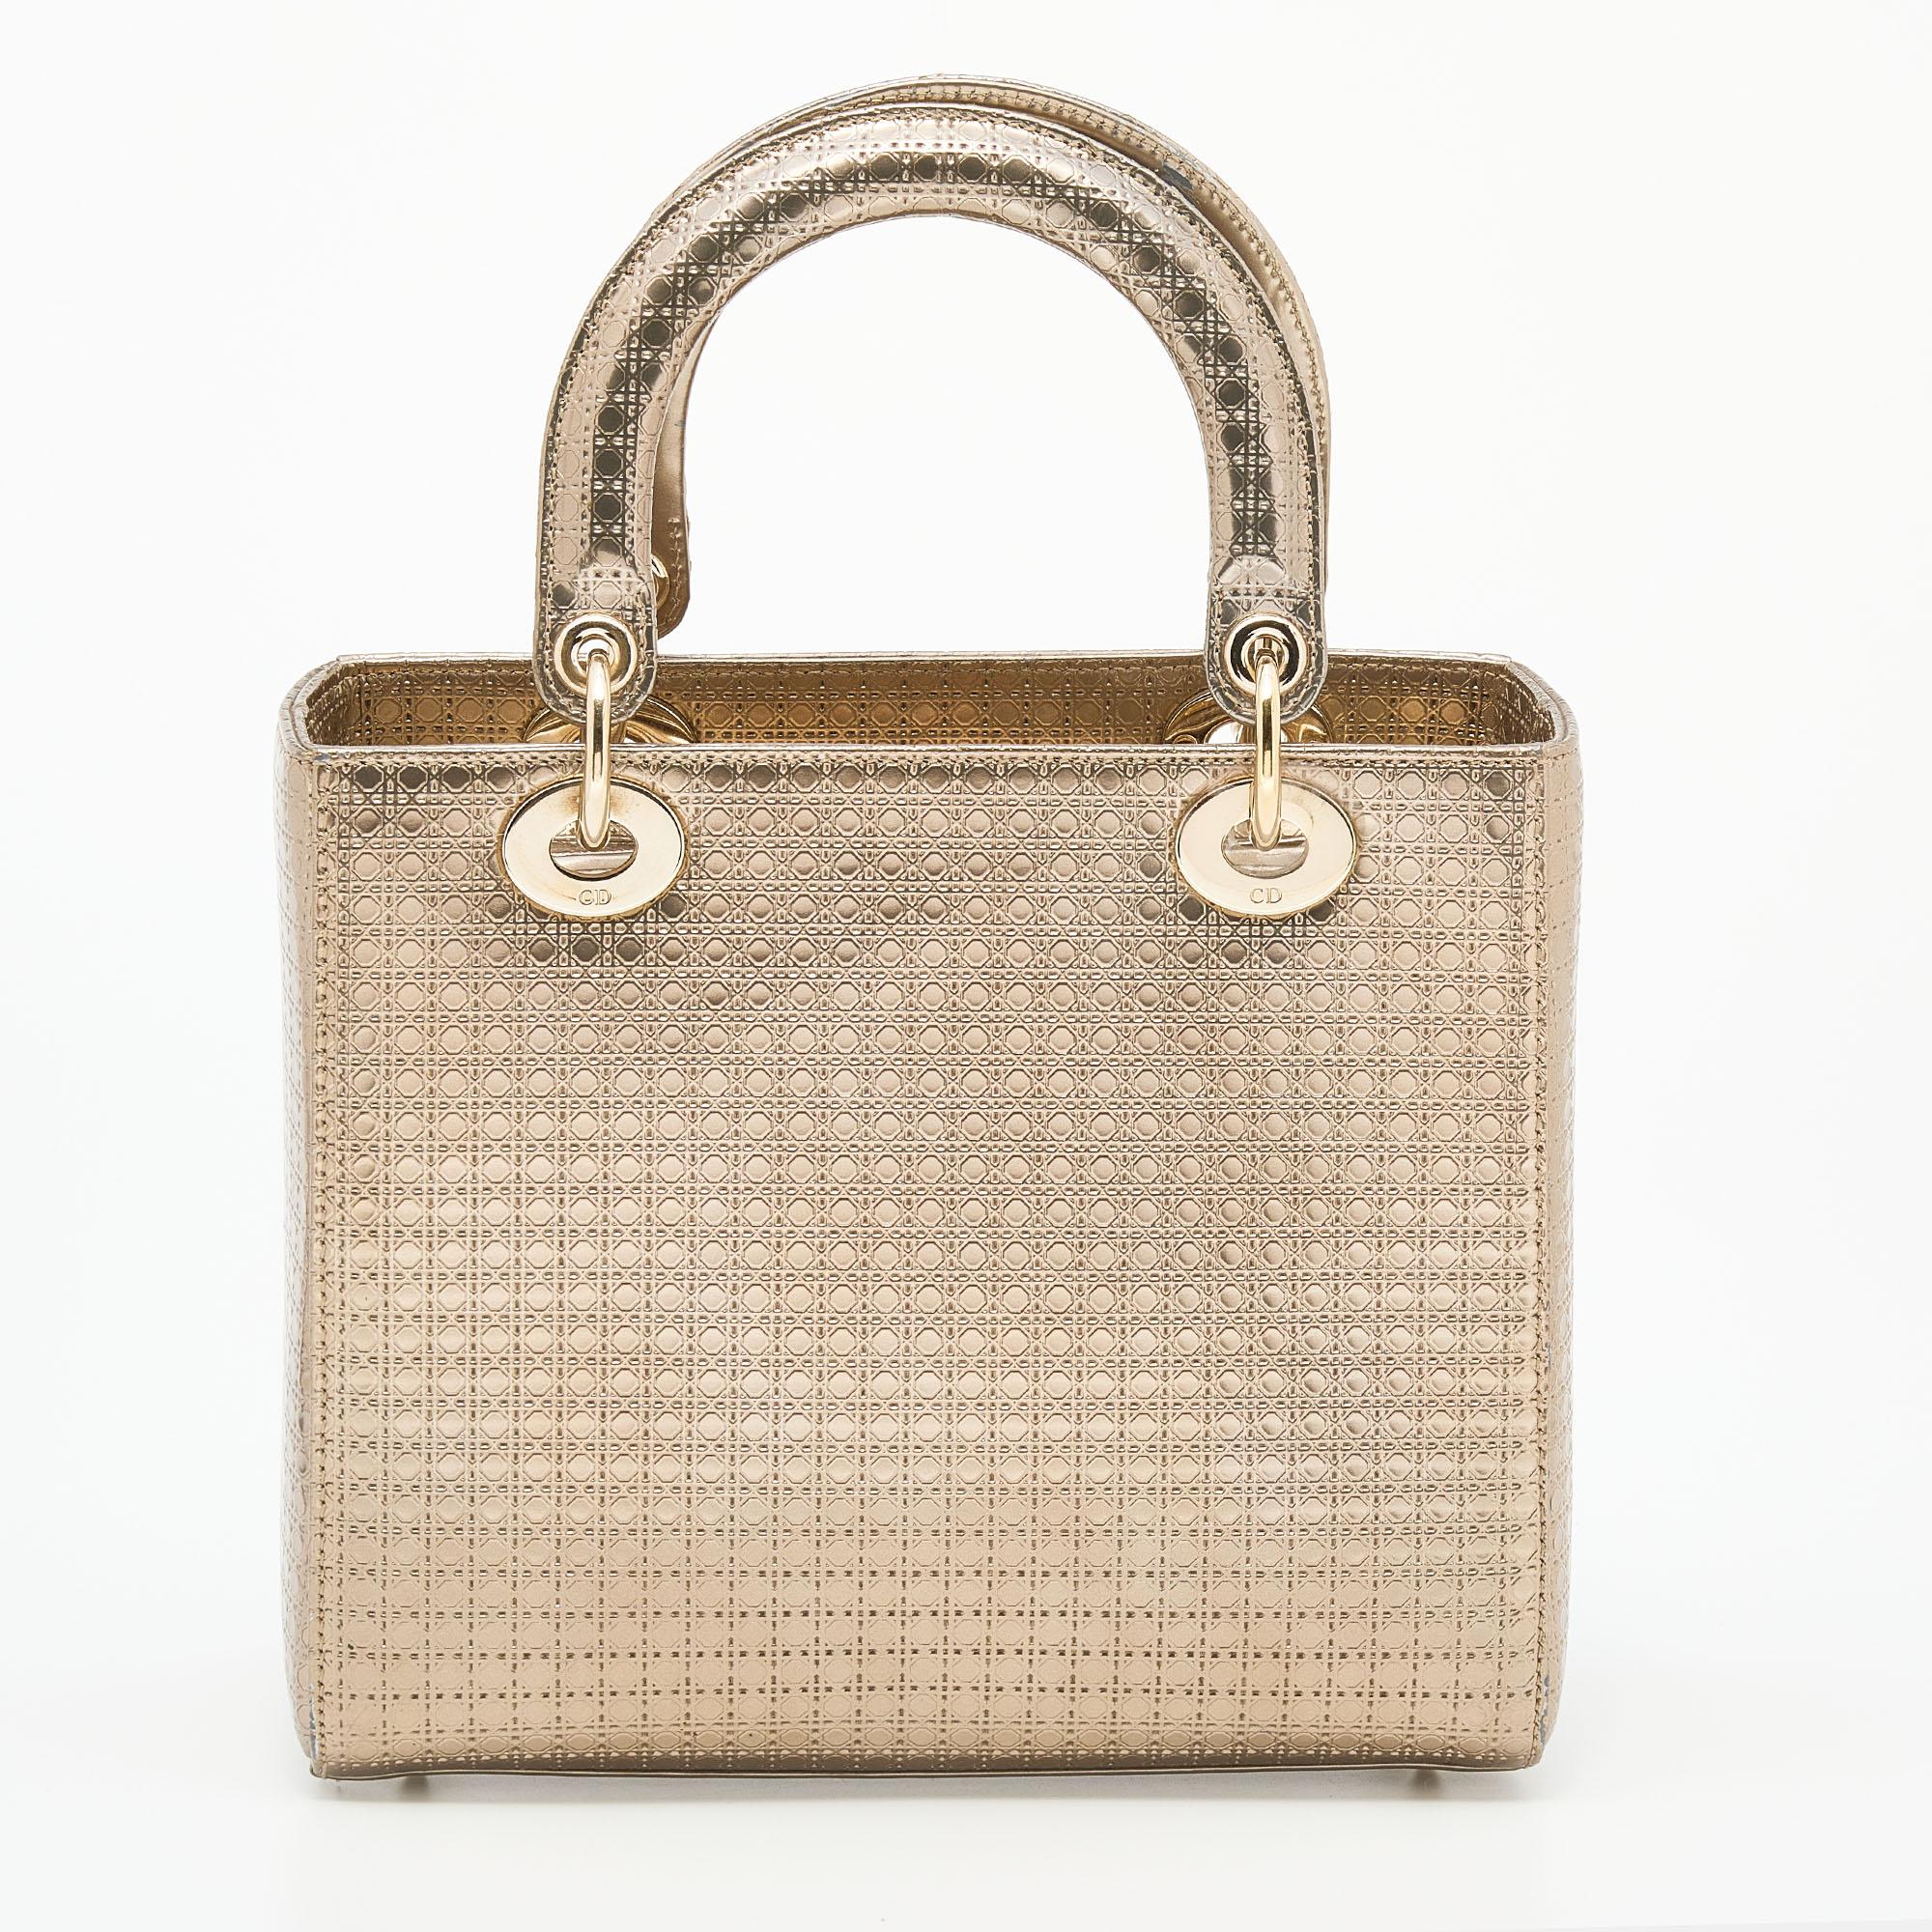 An investment-worthy handbag, the Lady Dior tote is an iconic design coveted by fashionistas around the world. This gold-hued version has been crafted from leather and features the label's signature Microcannage pattern throughout. It is held by